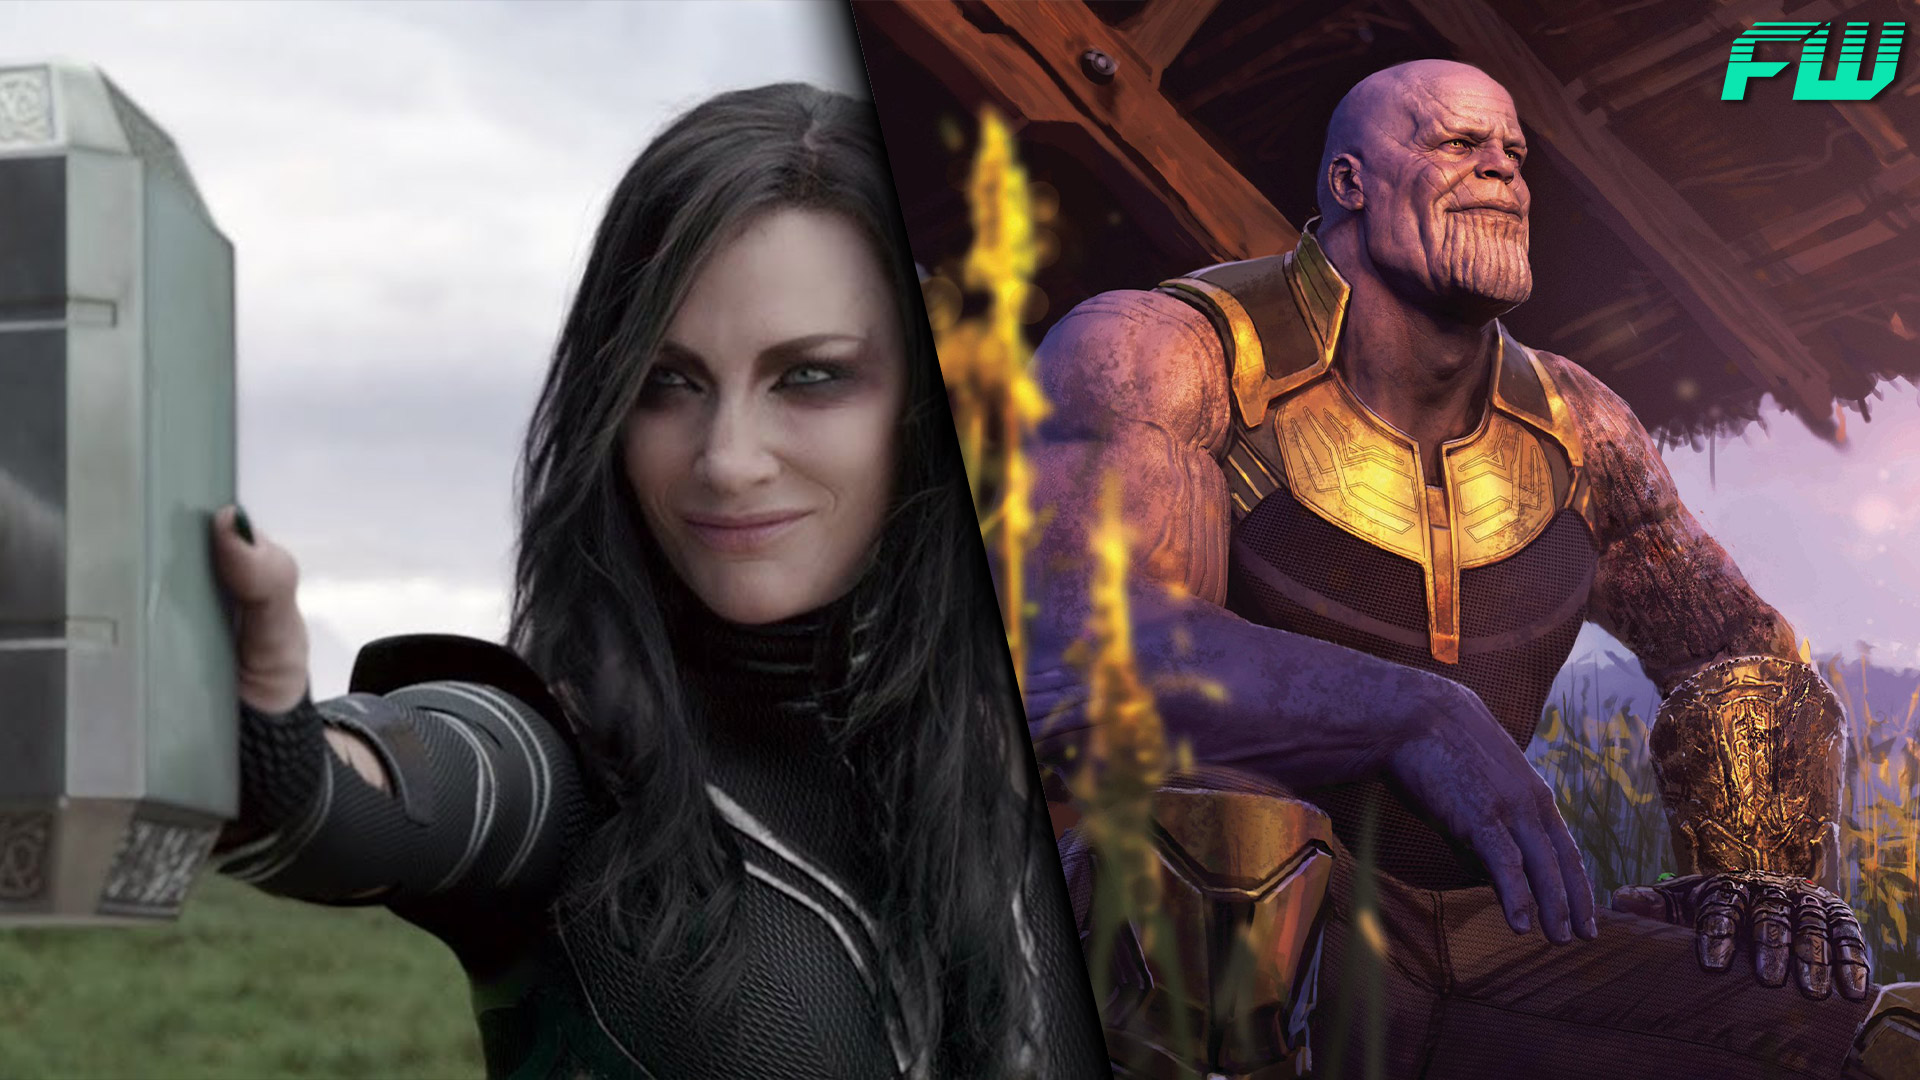 10 Scenes From Marvel Cinematic Universe Even Fans Didn't